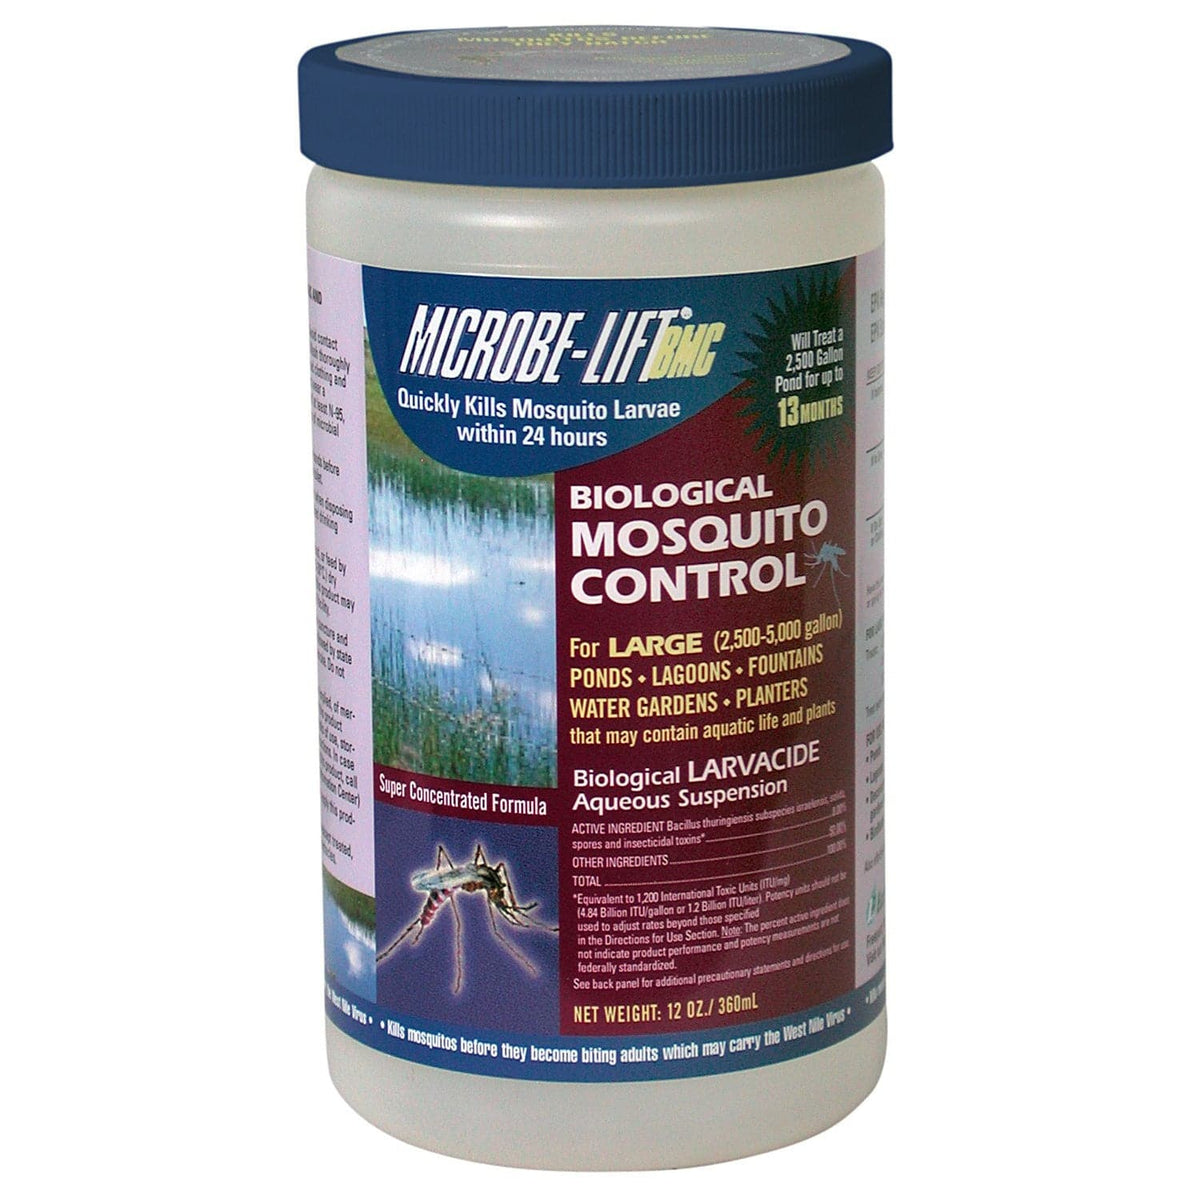 A bottle of TAS Microbe-Lift BMC 12 oz., a microbial insect control for mosquito control in water gardens, on a white background.